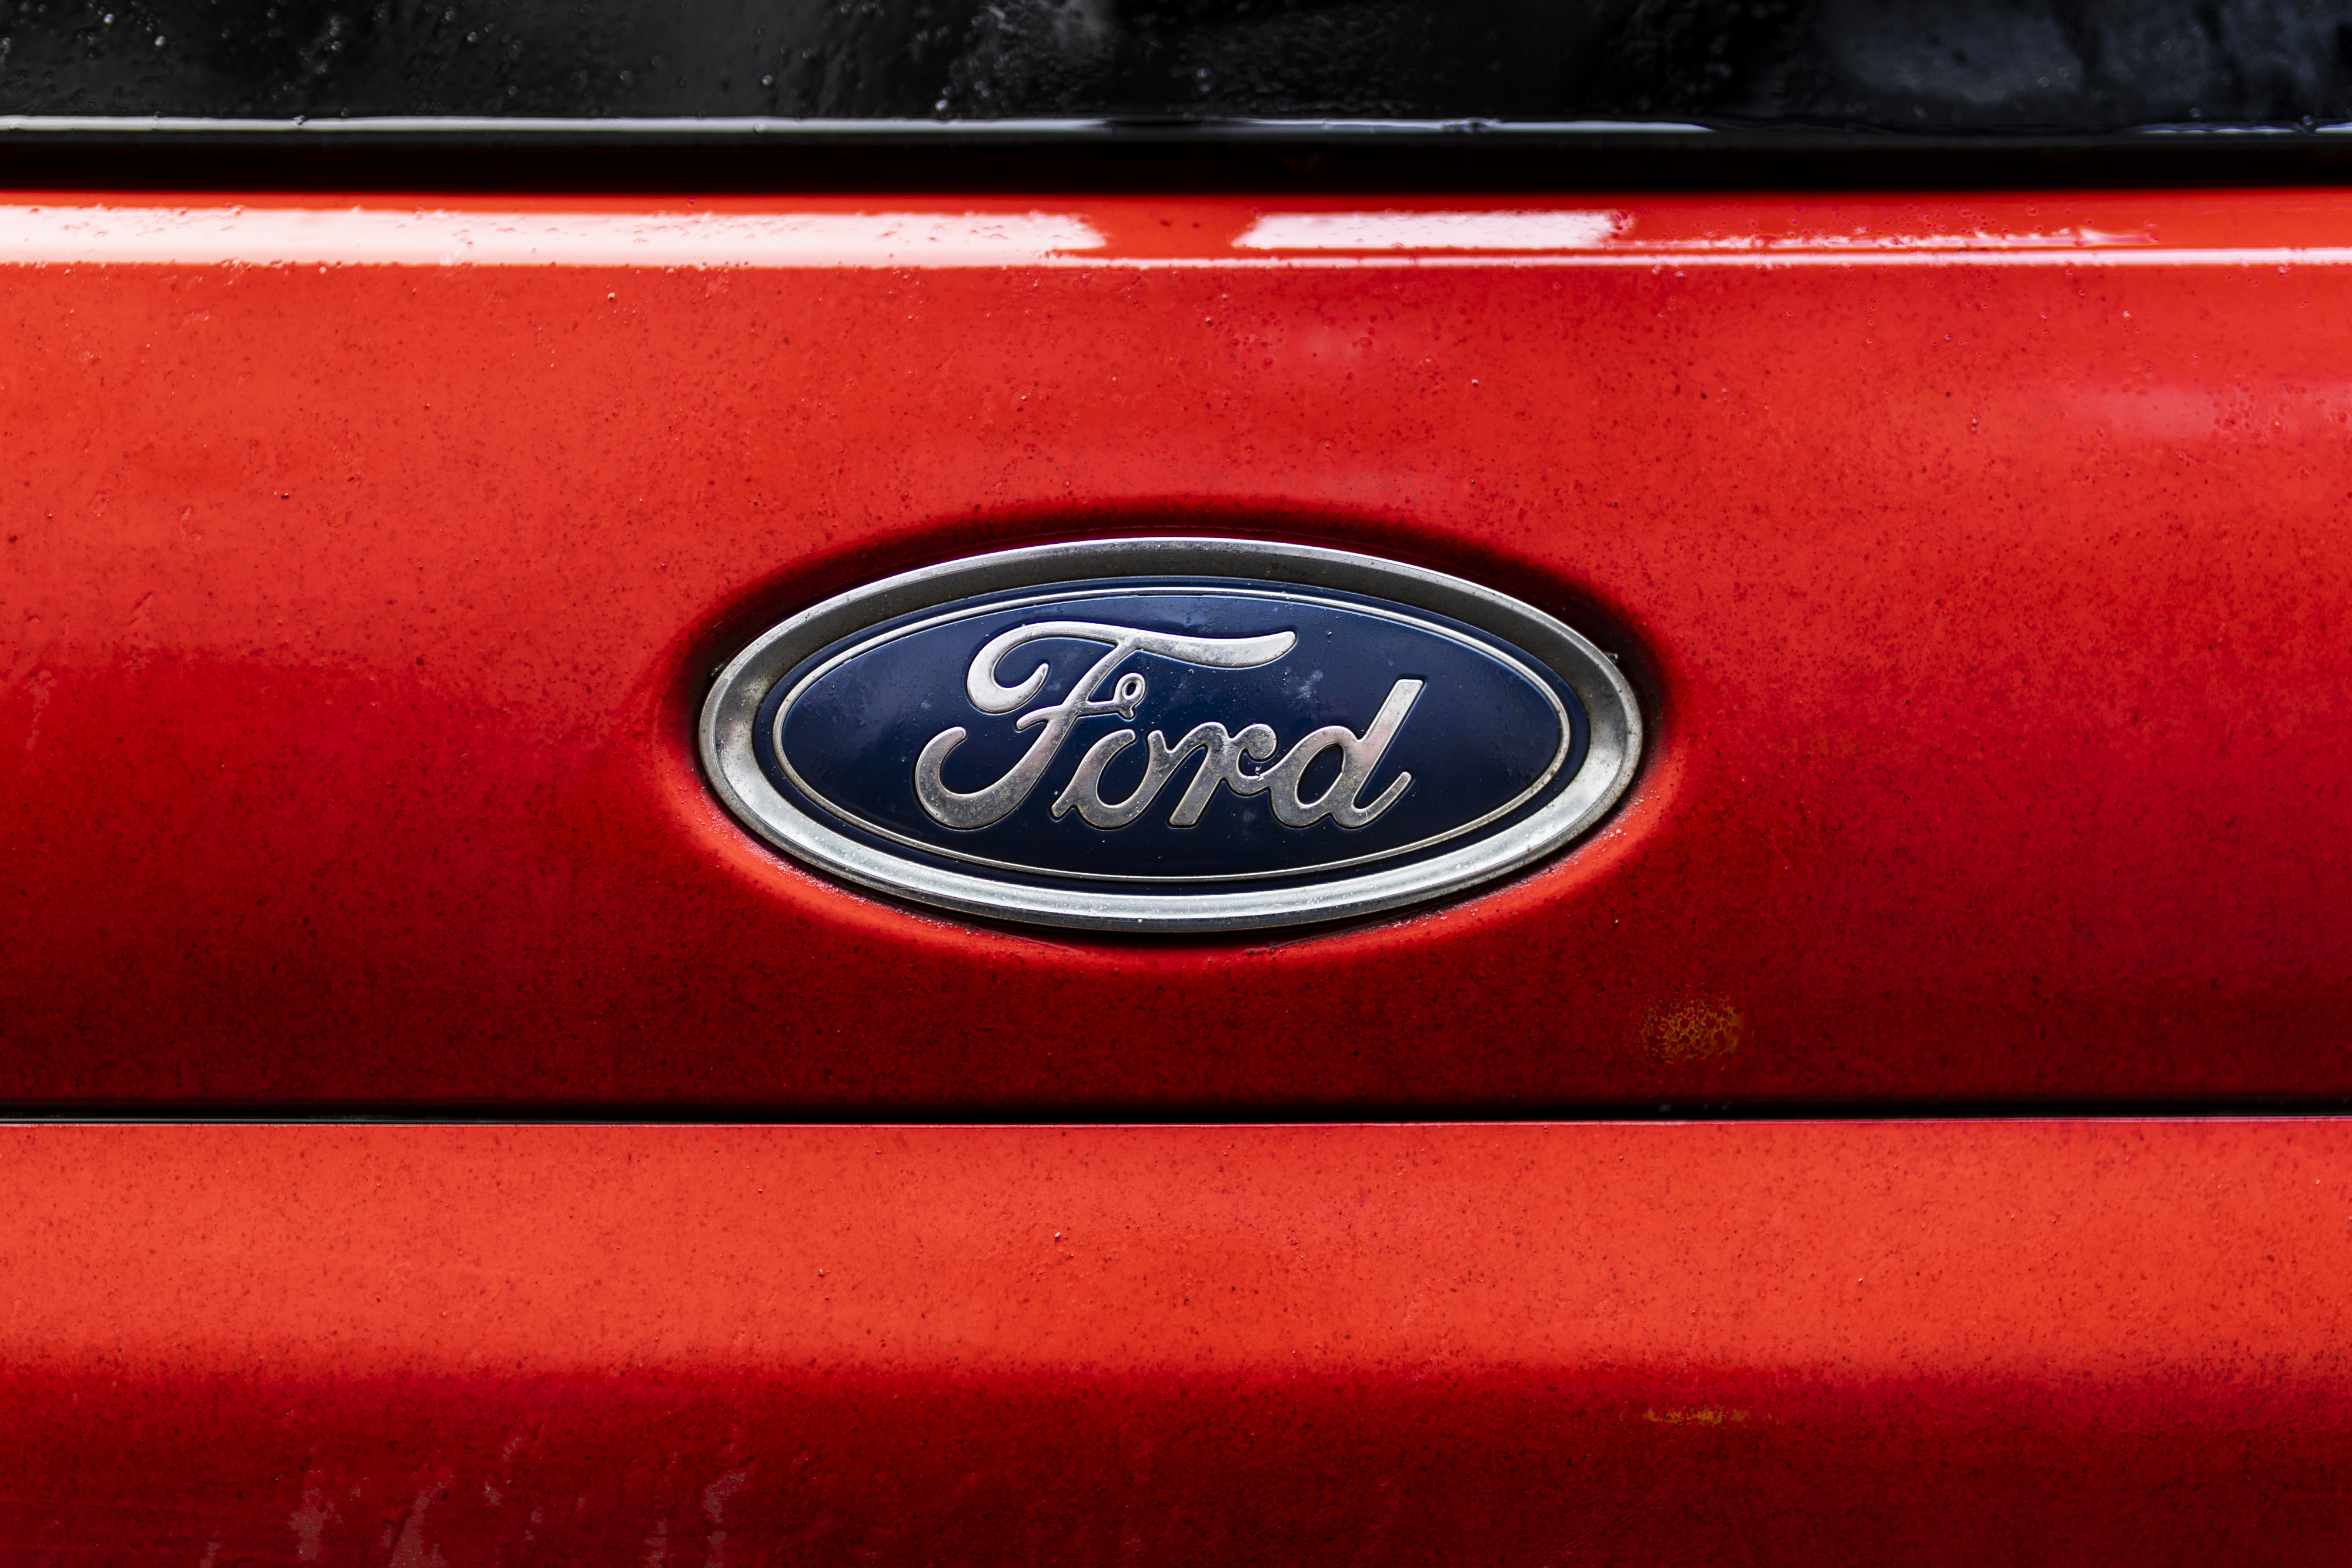 Latest consumer recalls: Ford driveshaft issues, ice maker